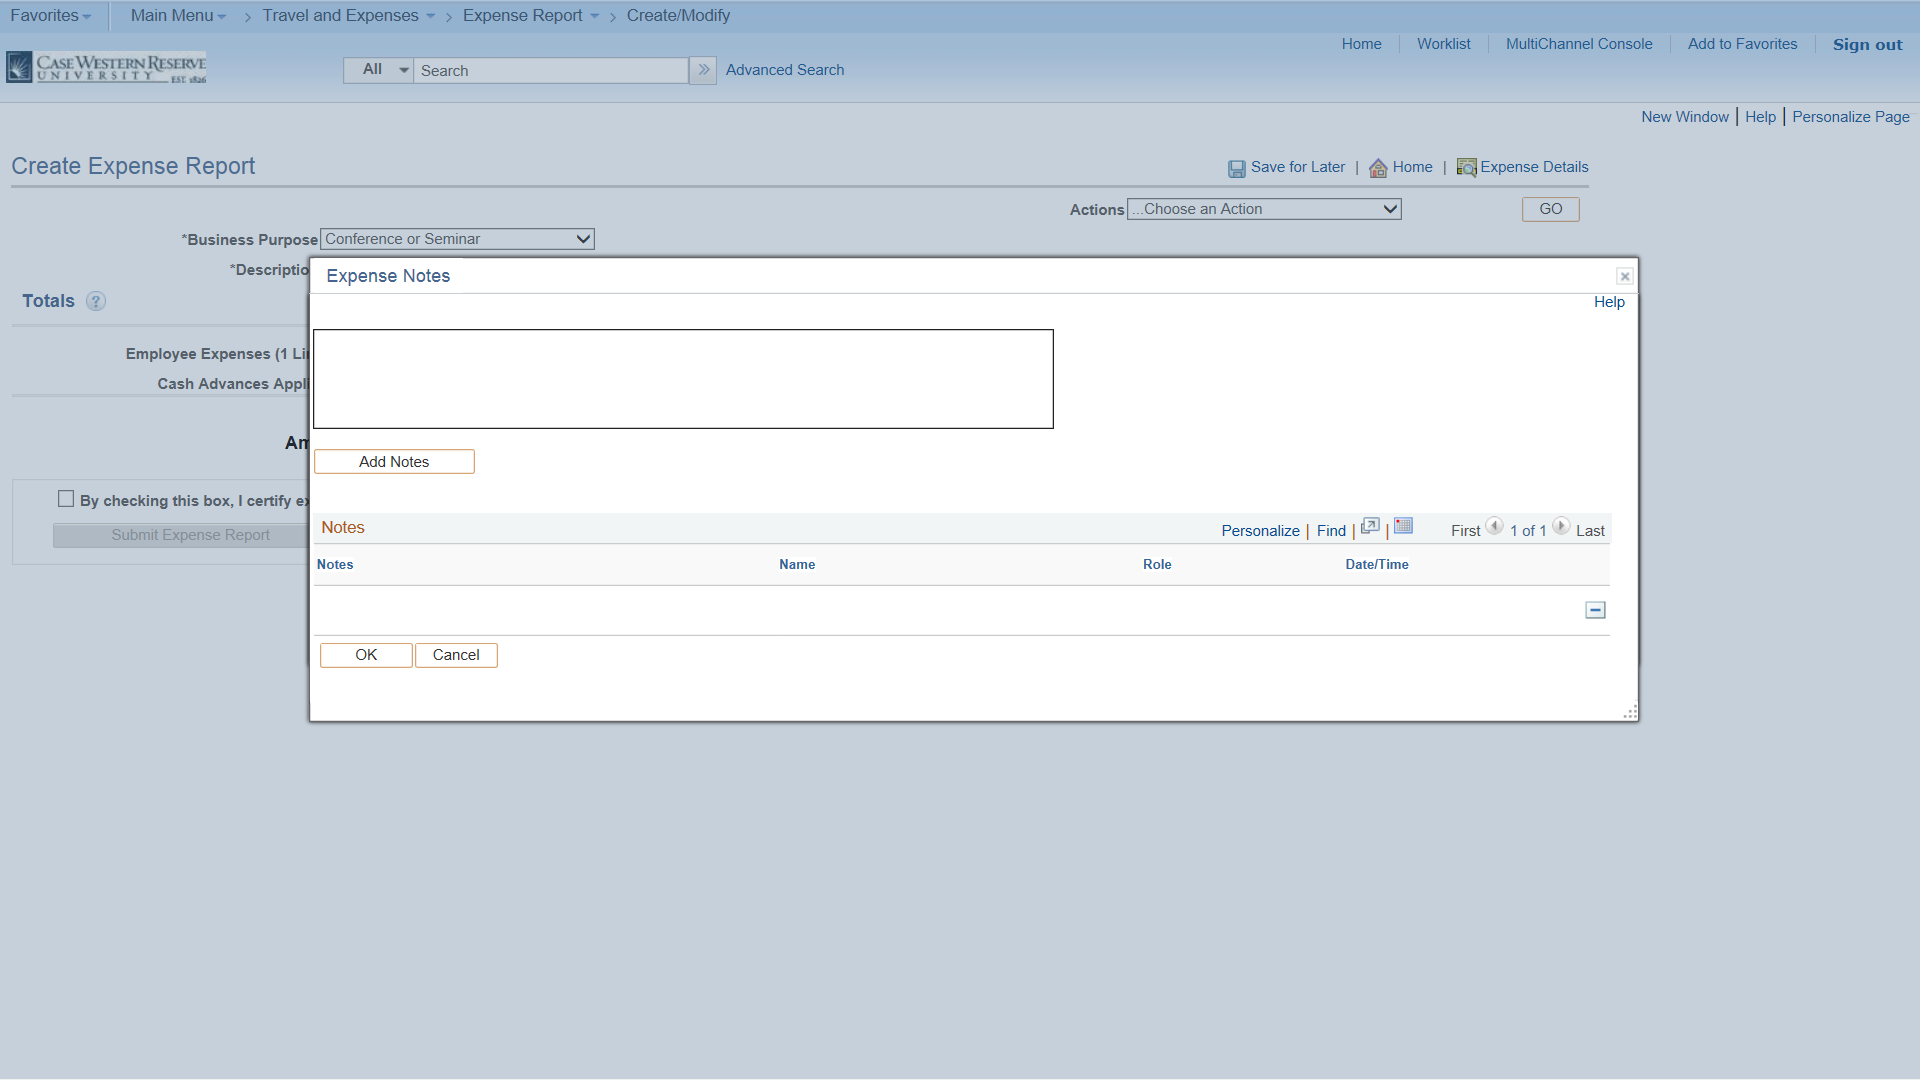 PeopleSoft Financials screen shot displaying a text box where comments or notes may be added.